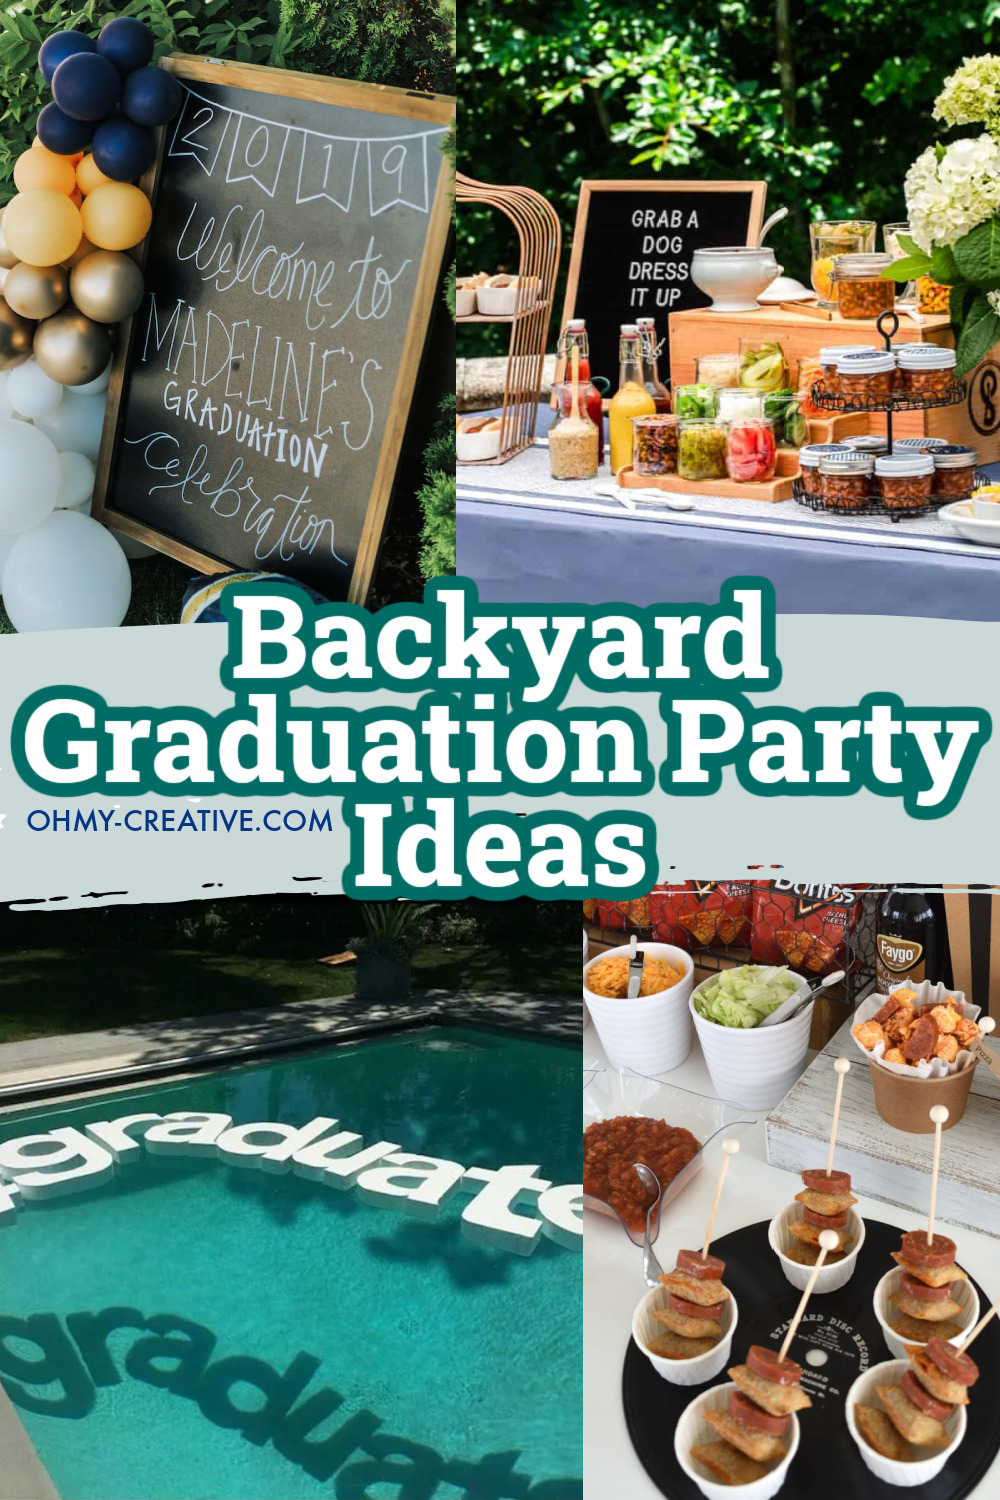 A collage of backyard graduation party ideas including food station ideas and backyard grad party decorations.